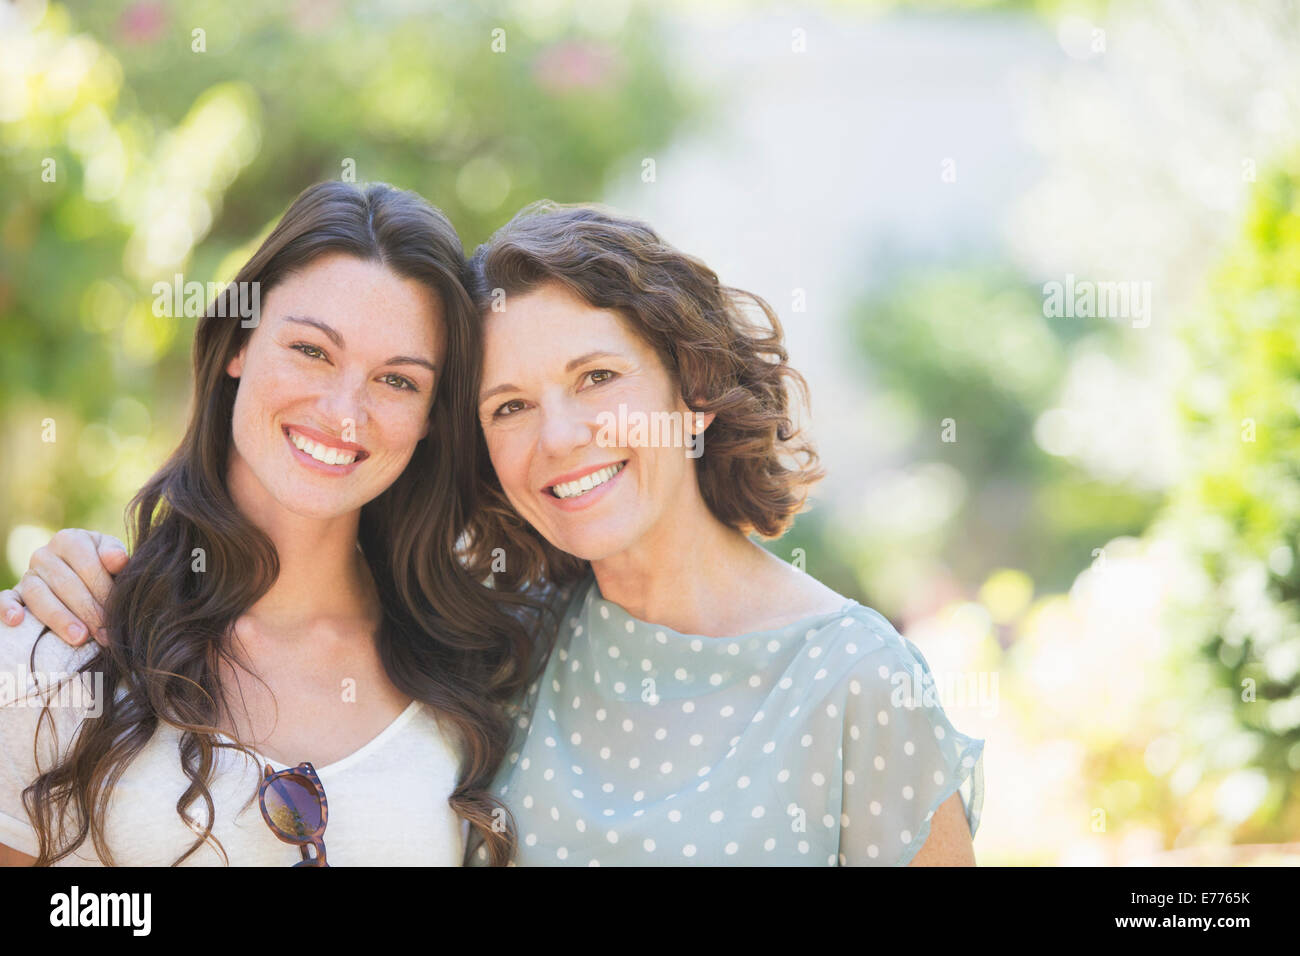 Mother and daughter smiling outdoors Stock Photo